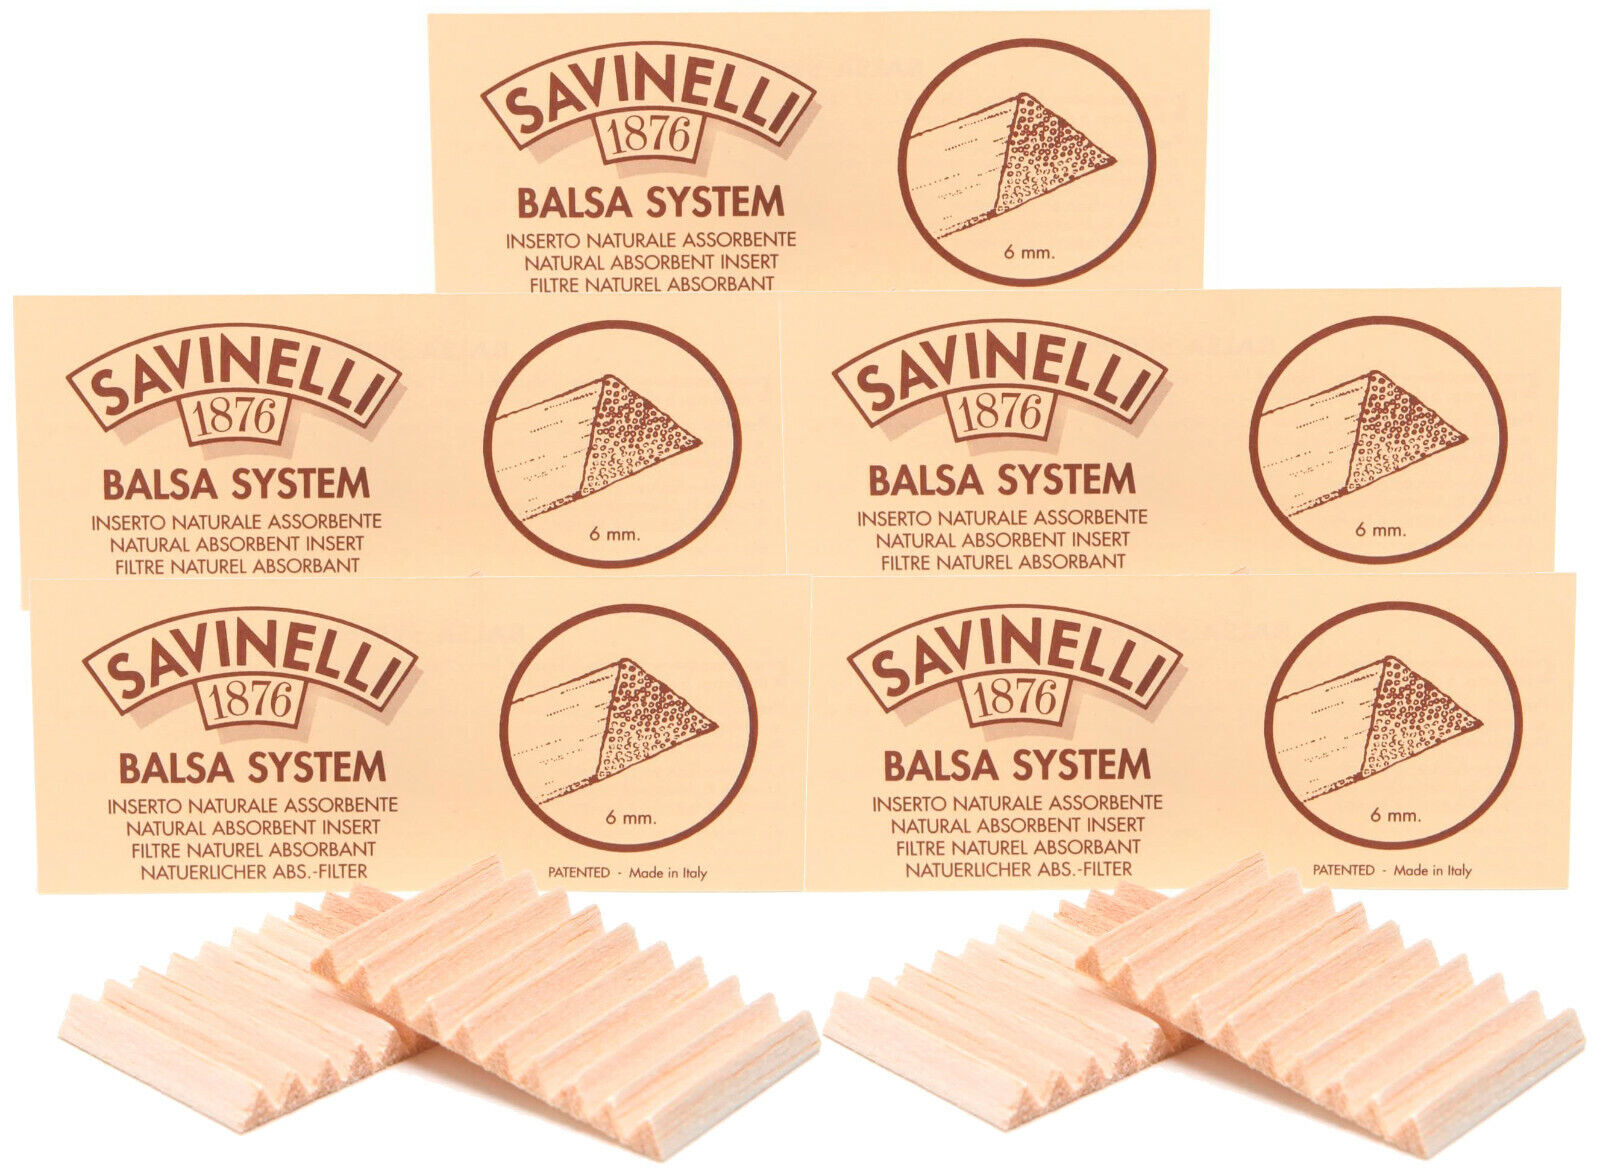 5 Packs 20 Savinelli Dry System 6mm Balsa Filter Inserts for Pipes - 2321-5